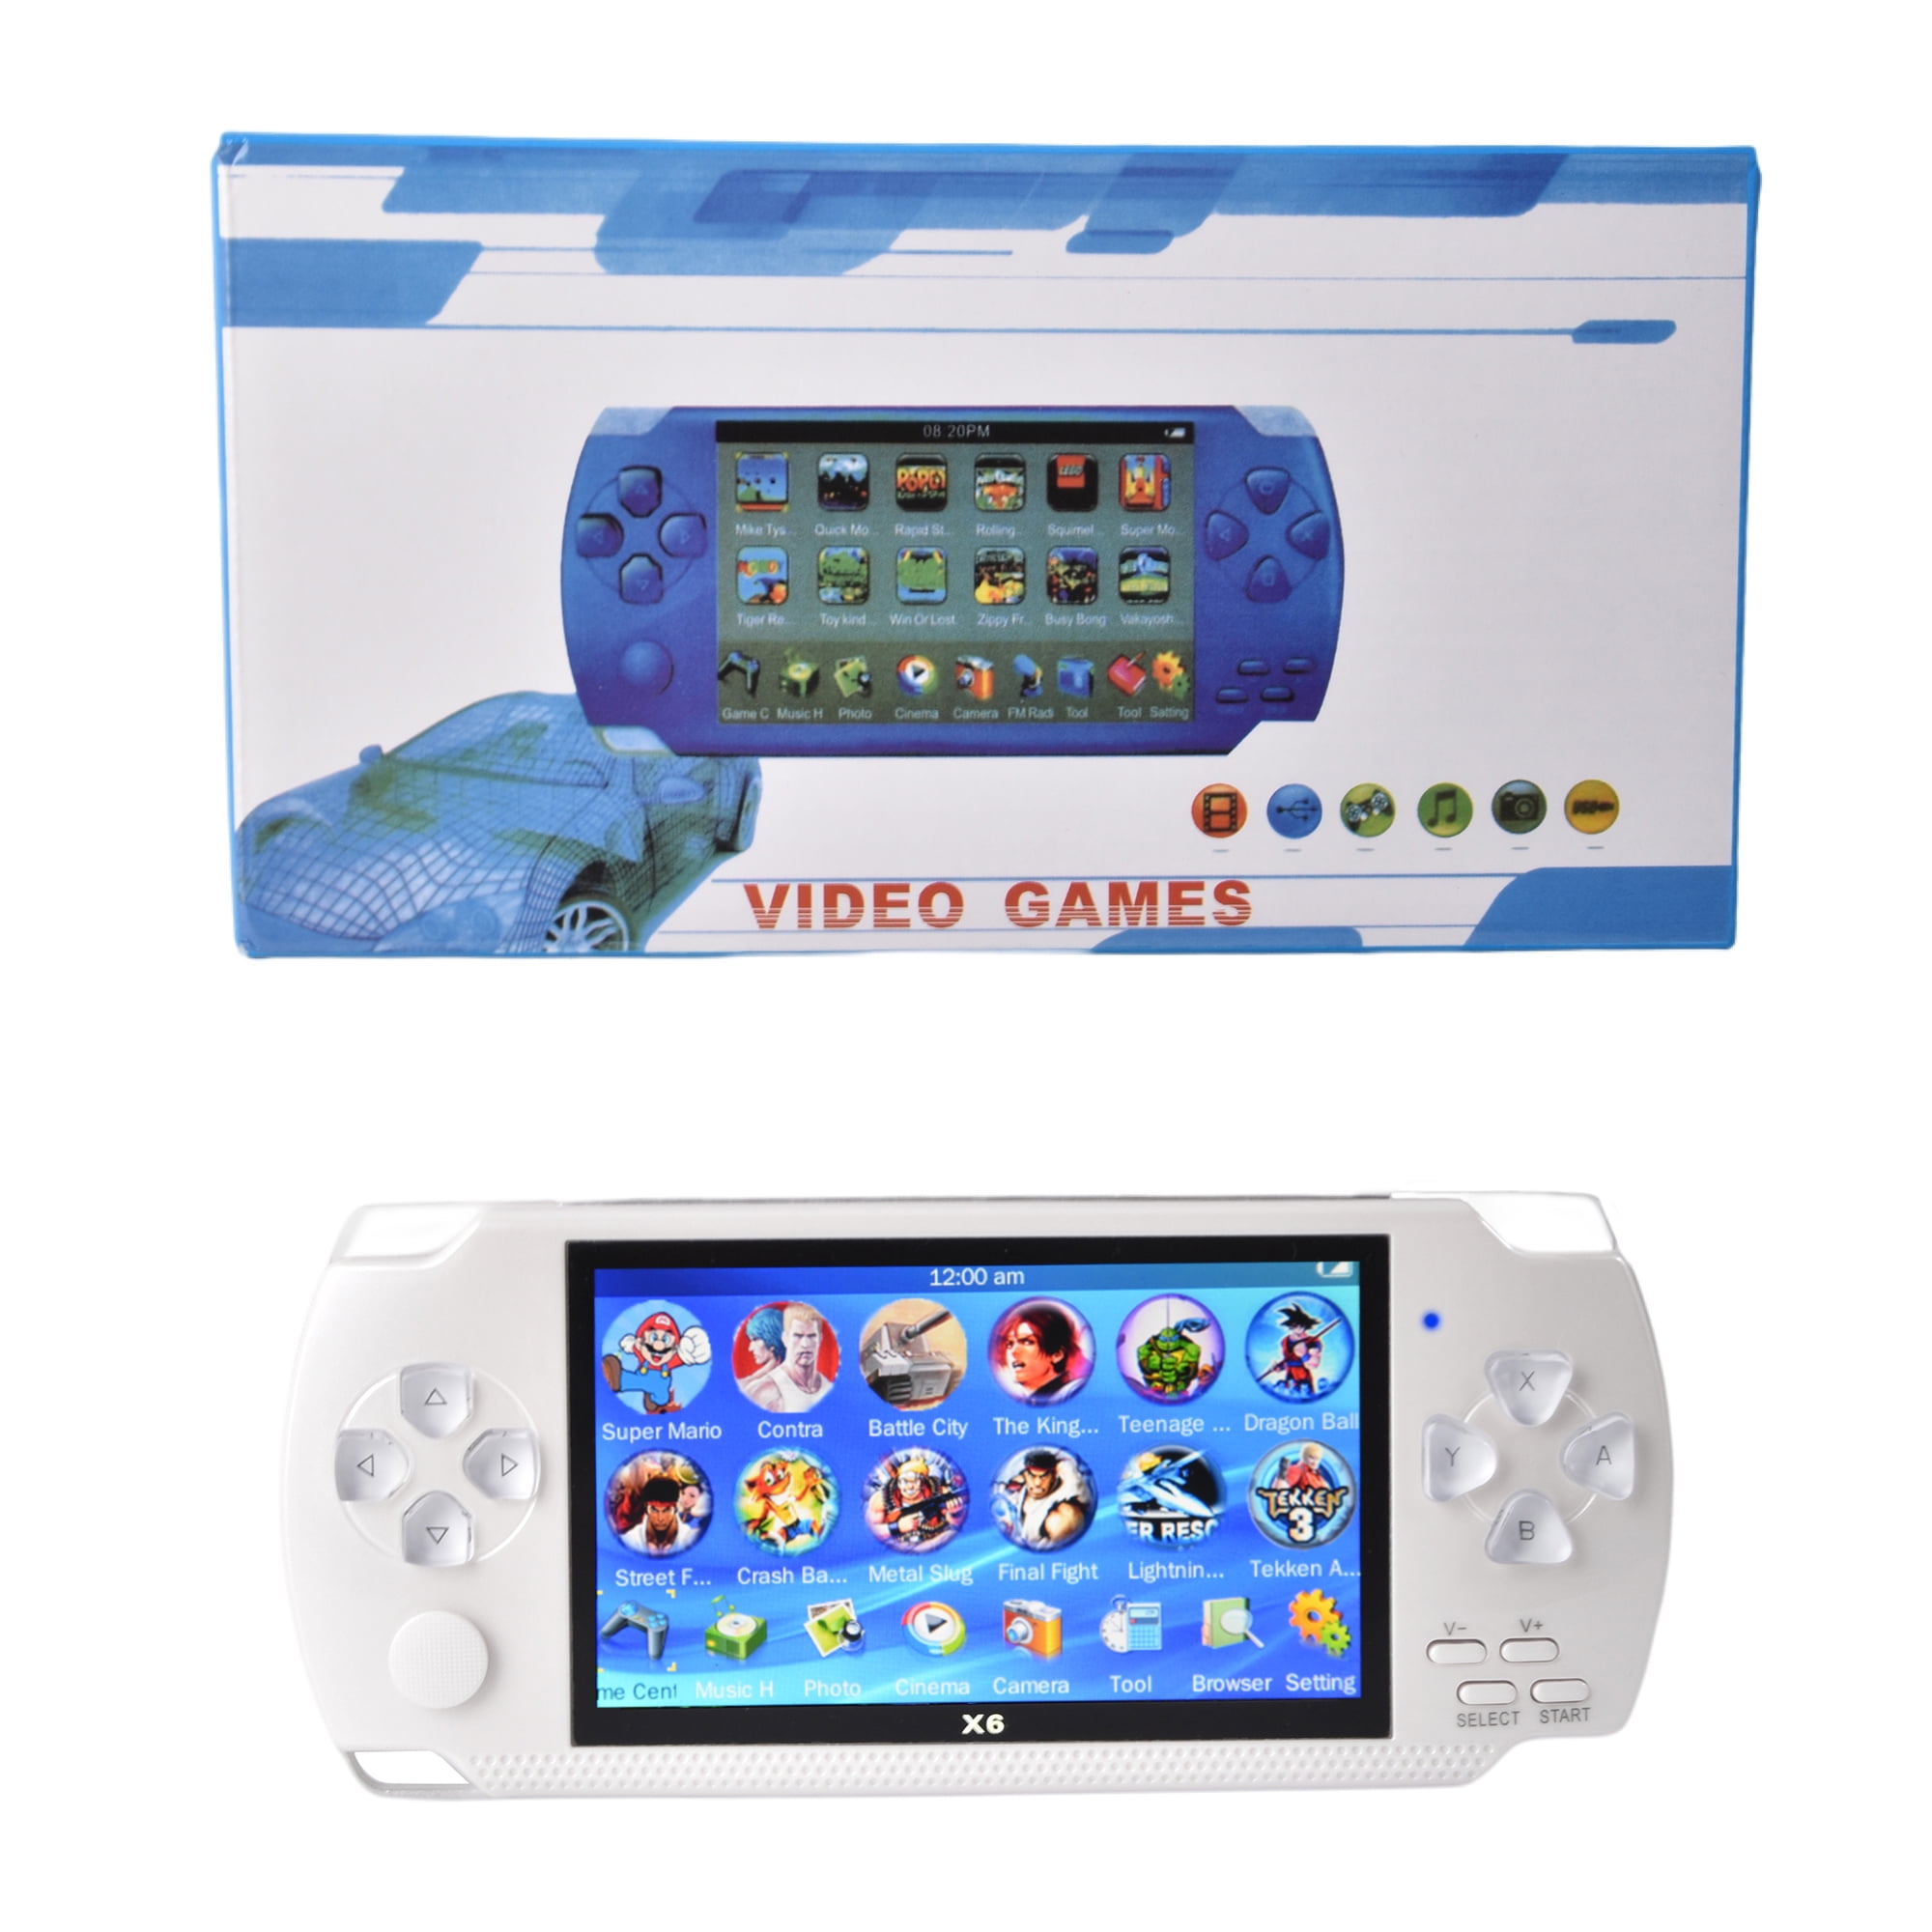 Handheld Game Machine X6 8GB High Definition Screen Builtin Over 10000 Free Games White Christmas Gift d9ec684f e977 4891 8dce 59bd74f9e645.3642b887a526112cdf3c7ed969cc52ad